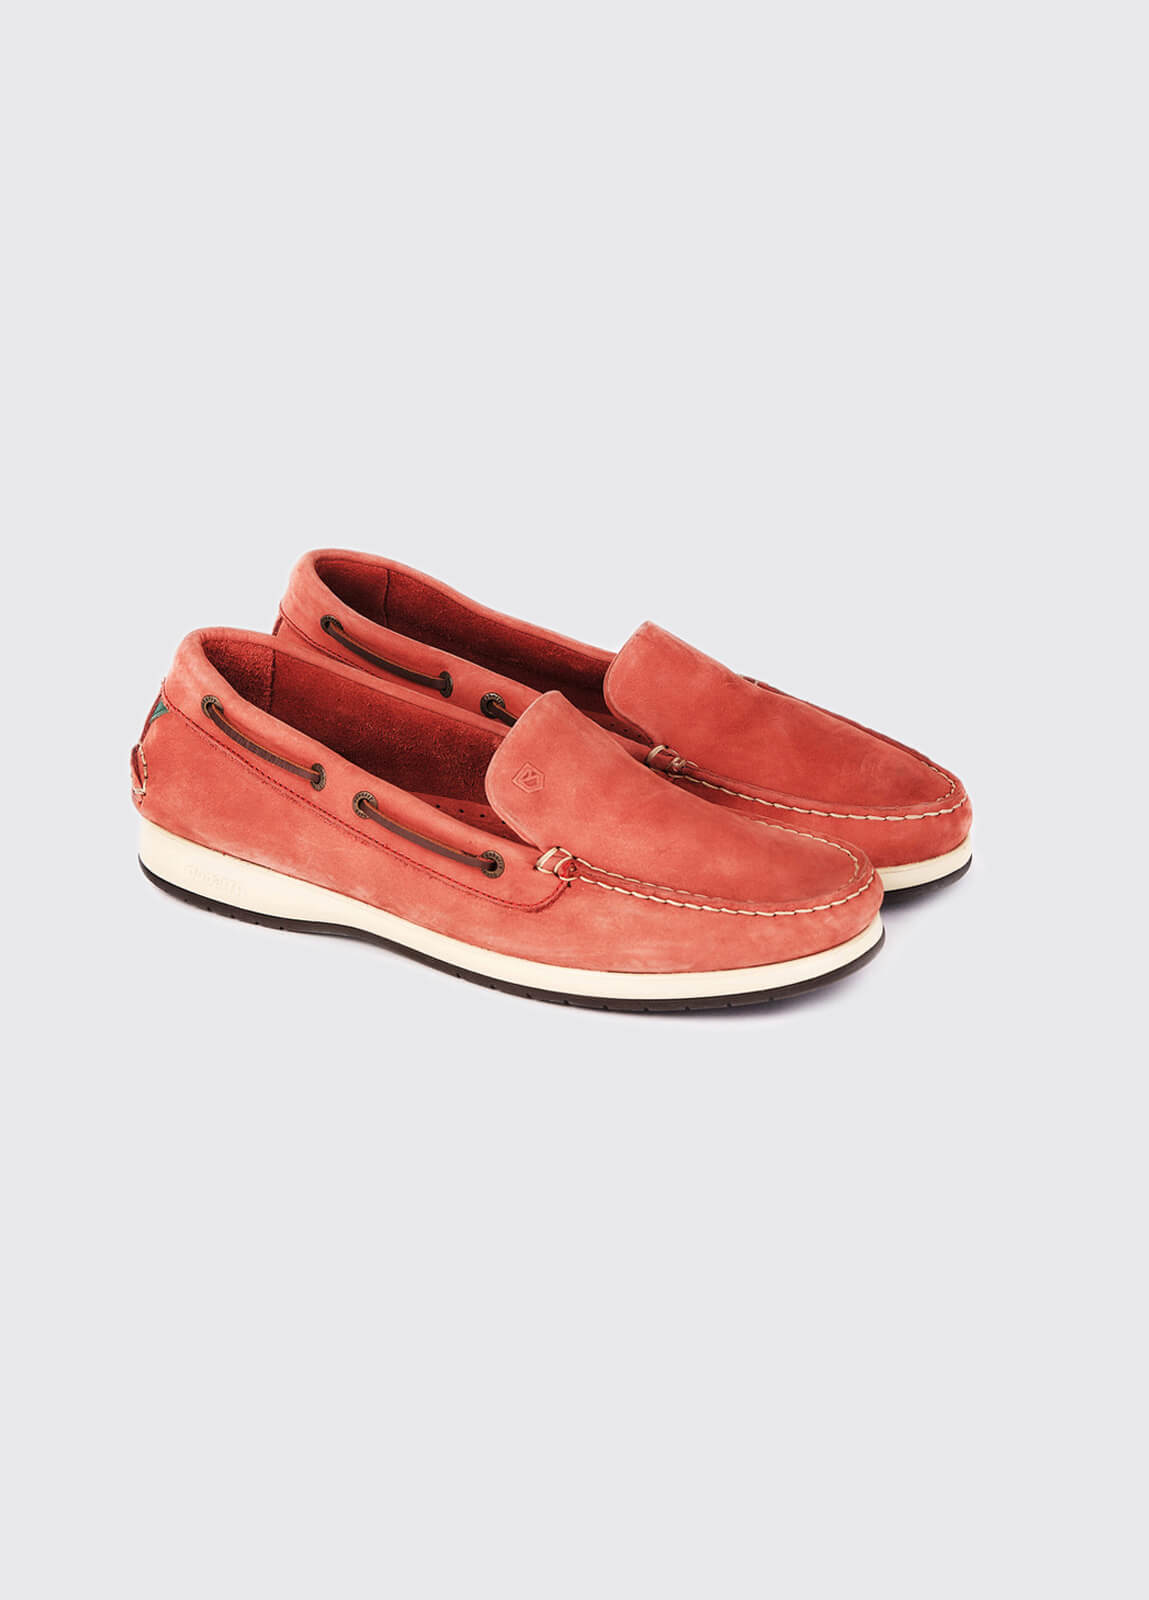 Marco XLT Deck Shoe - Red